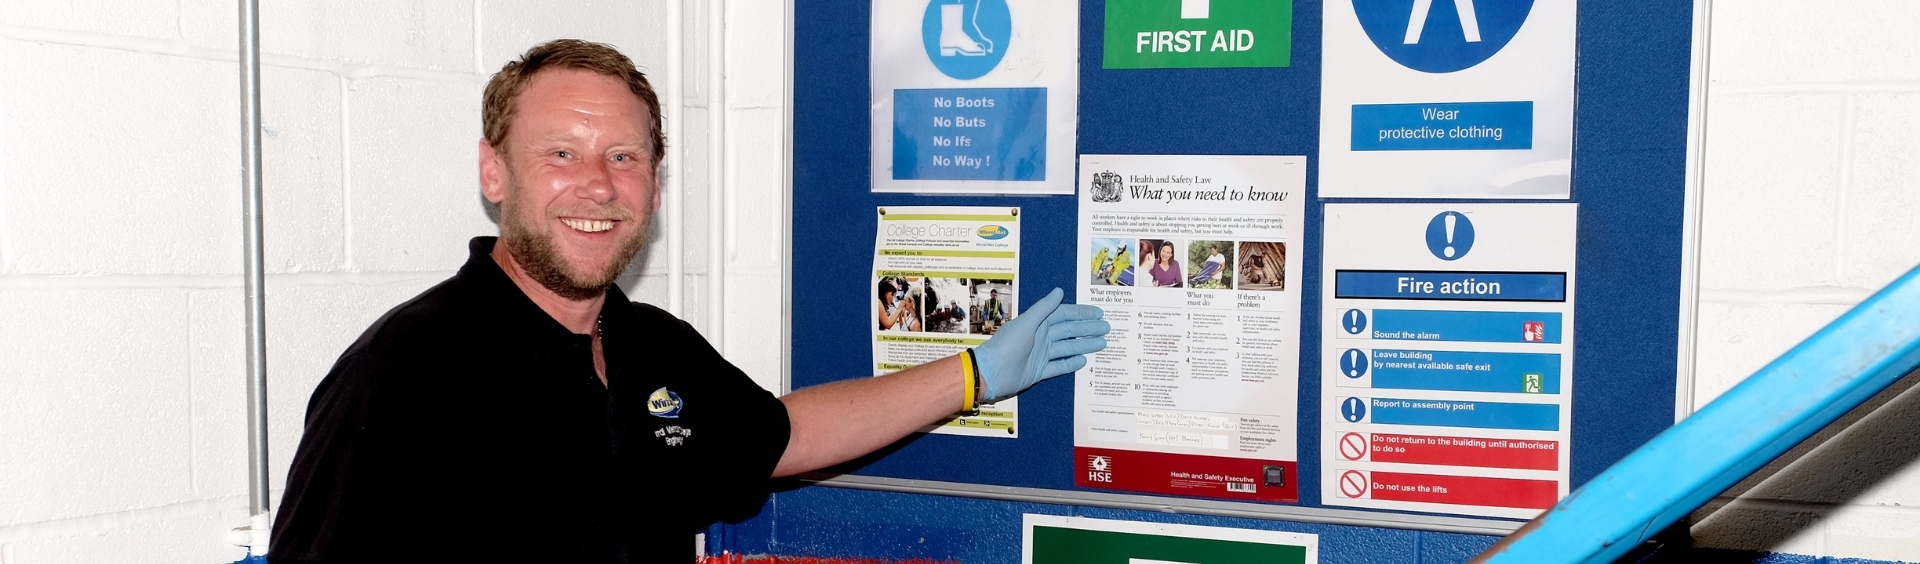 WMC General Certificate student pointing at Health and Safety noticeboard